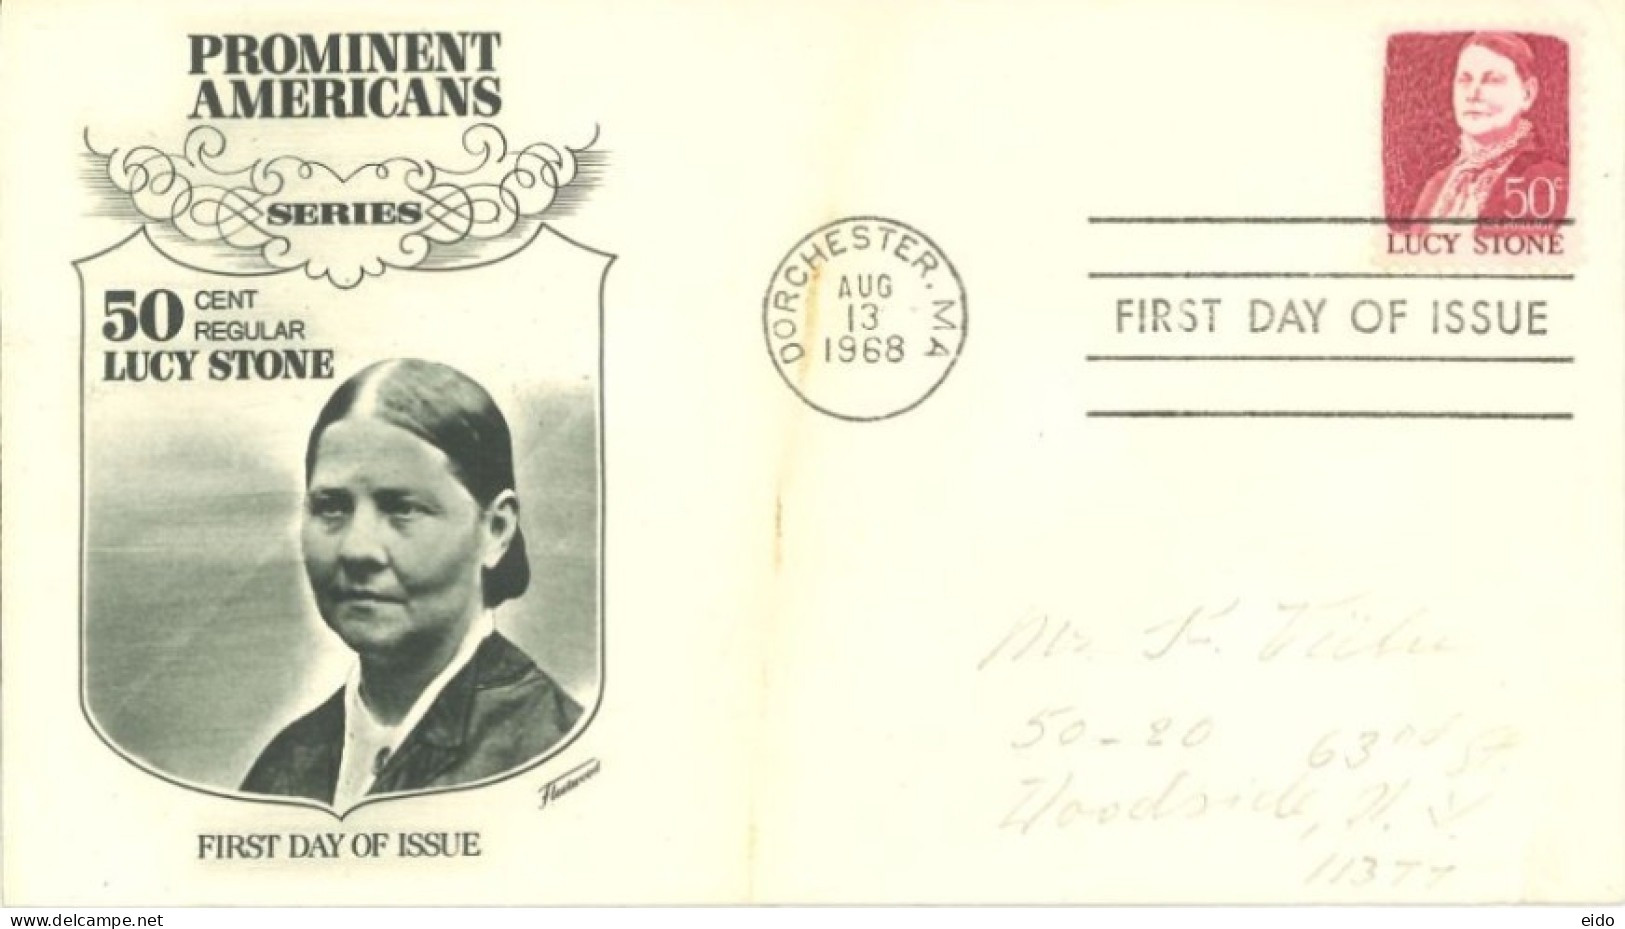 U.S.A.. -1968 -  FDC STAMP OF PROMINENT AMERICANS SERIES, LUCY STONE SENT TO NEW YORK. - Covers & Documents